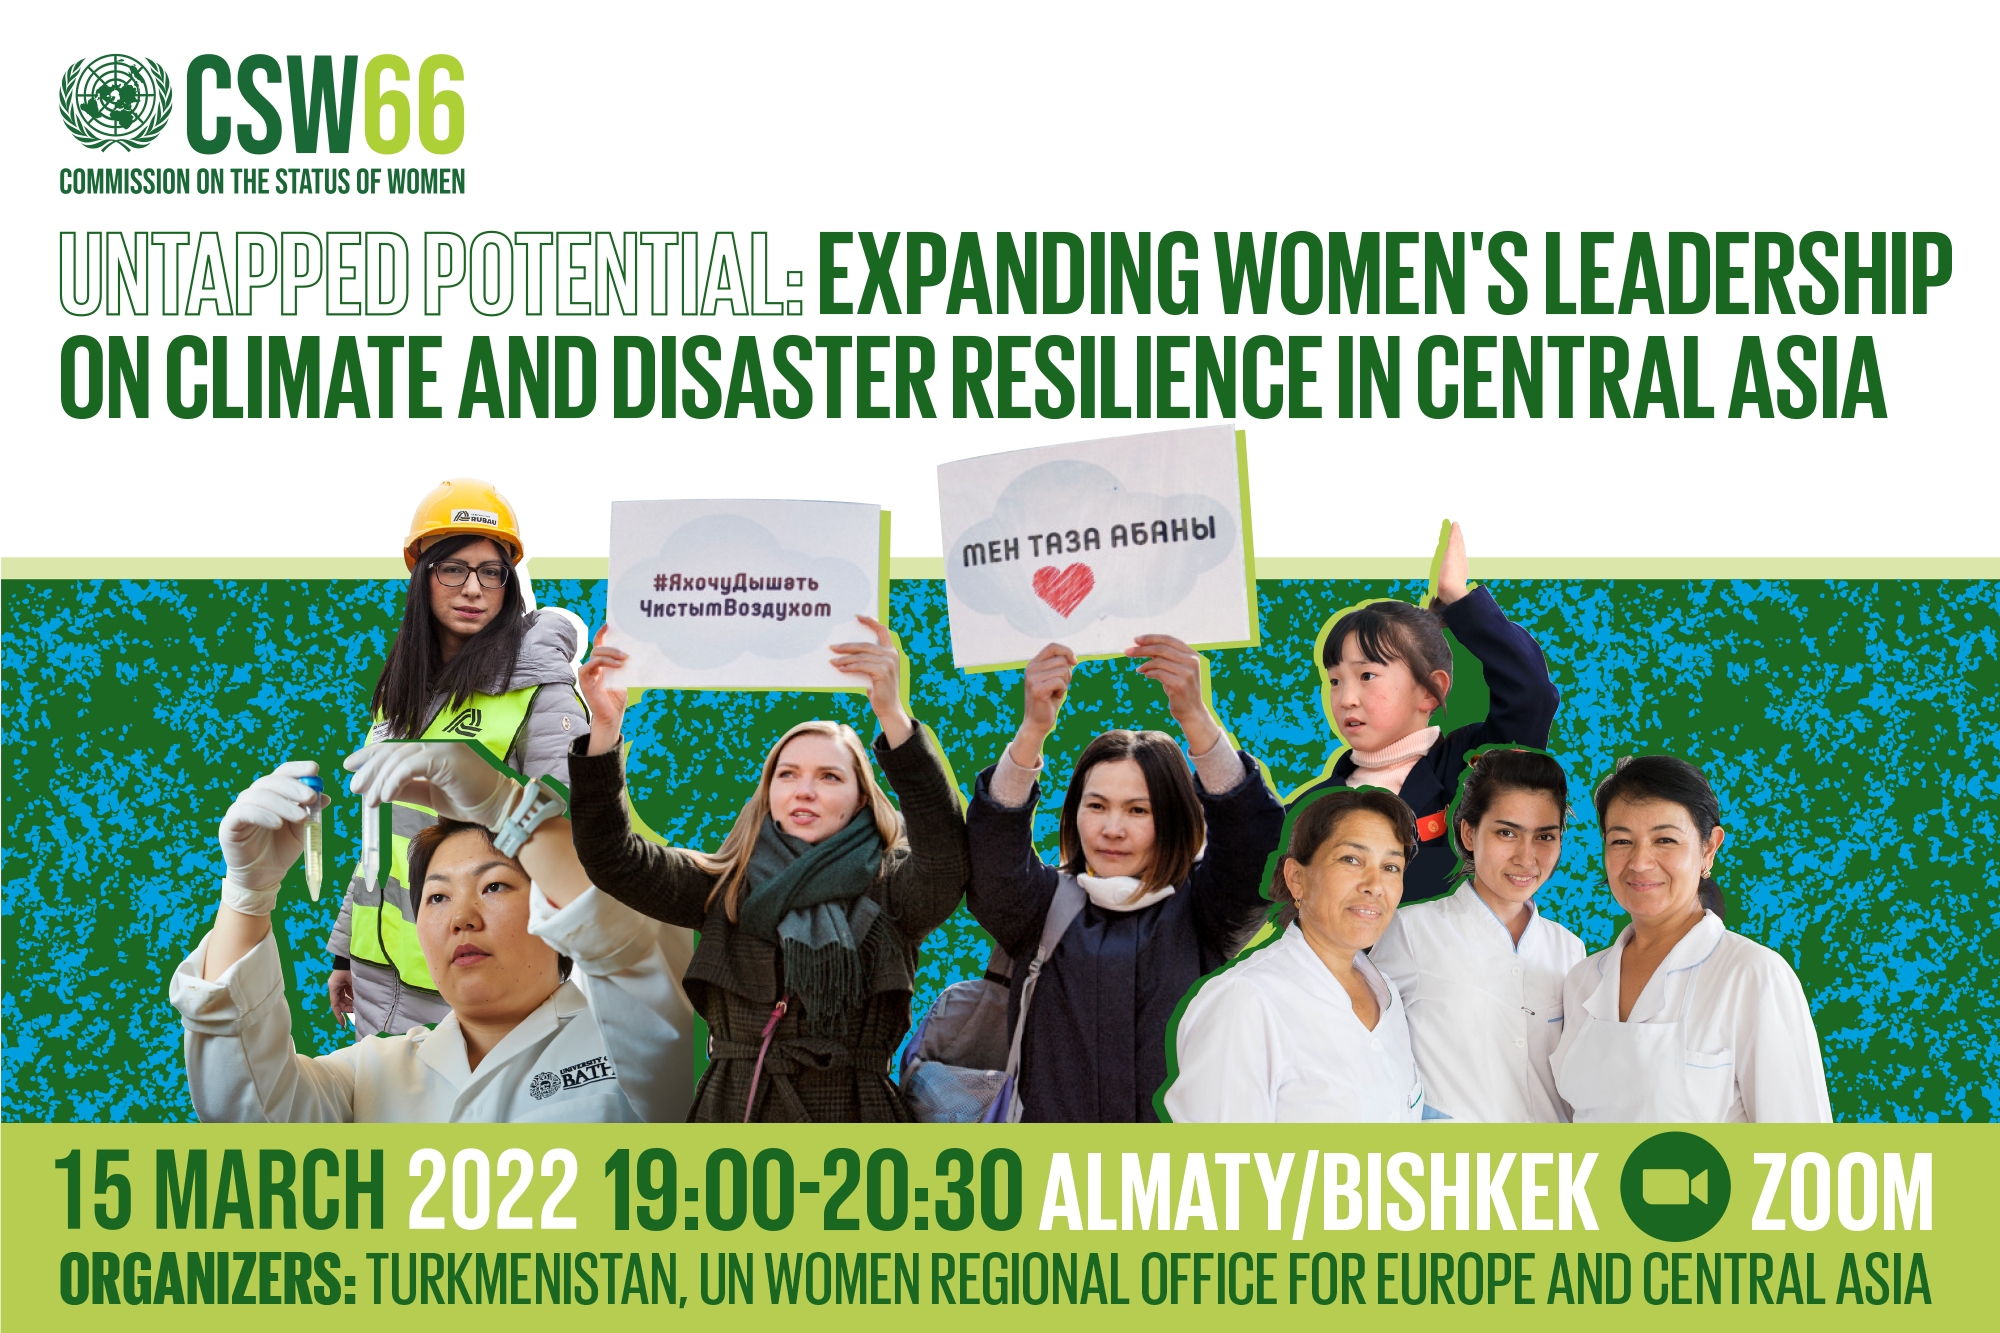 CSW66 side event - Untapped potential: Expanding women's leadership on climate and disaster resilience in Central Asia